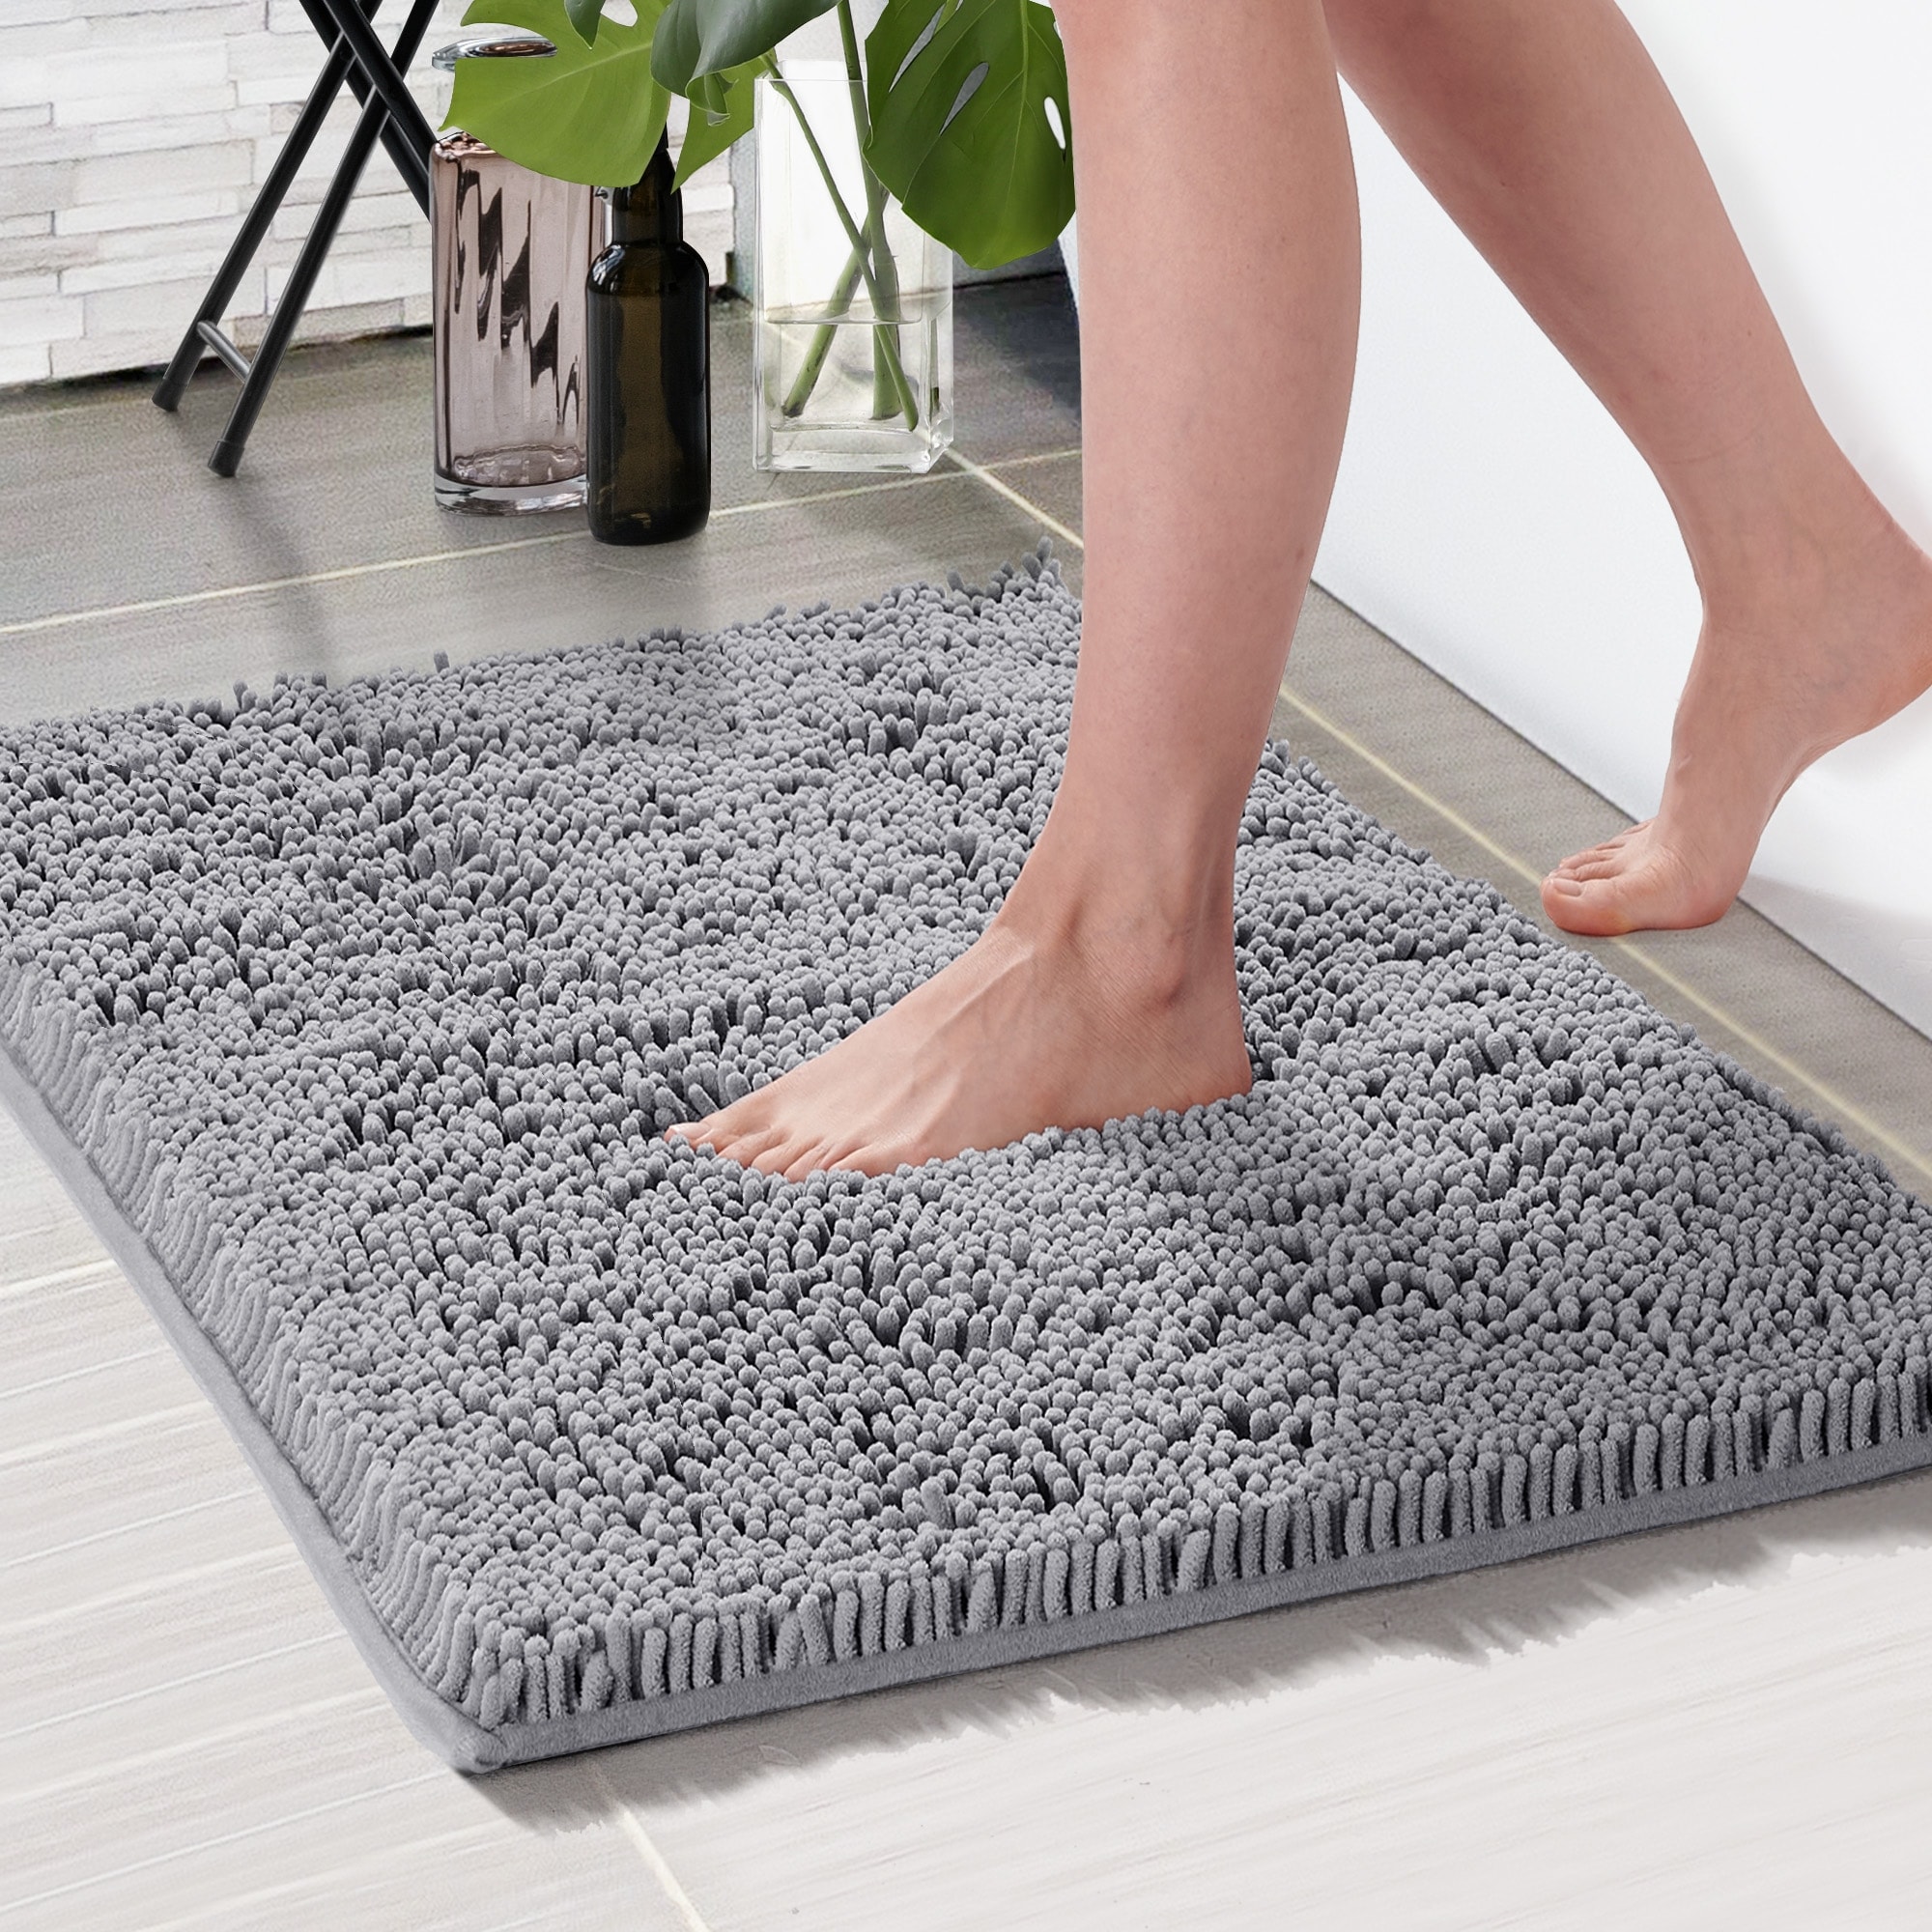 https://ak1.ostkcdn.com/images/products/is/images/direct/7957bcd5f705cdaa6221c044f369611e46ef32d9/Deconovo-Plush-Absorbent-Thick-Chenille-Bath-Rugs-%281-PC%29.jpg